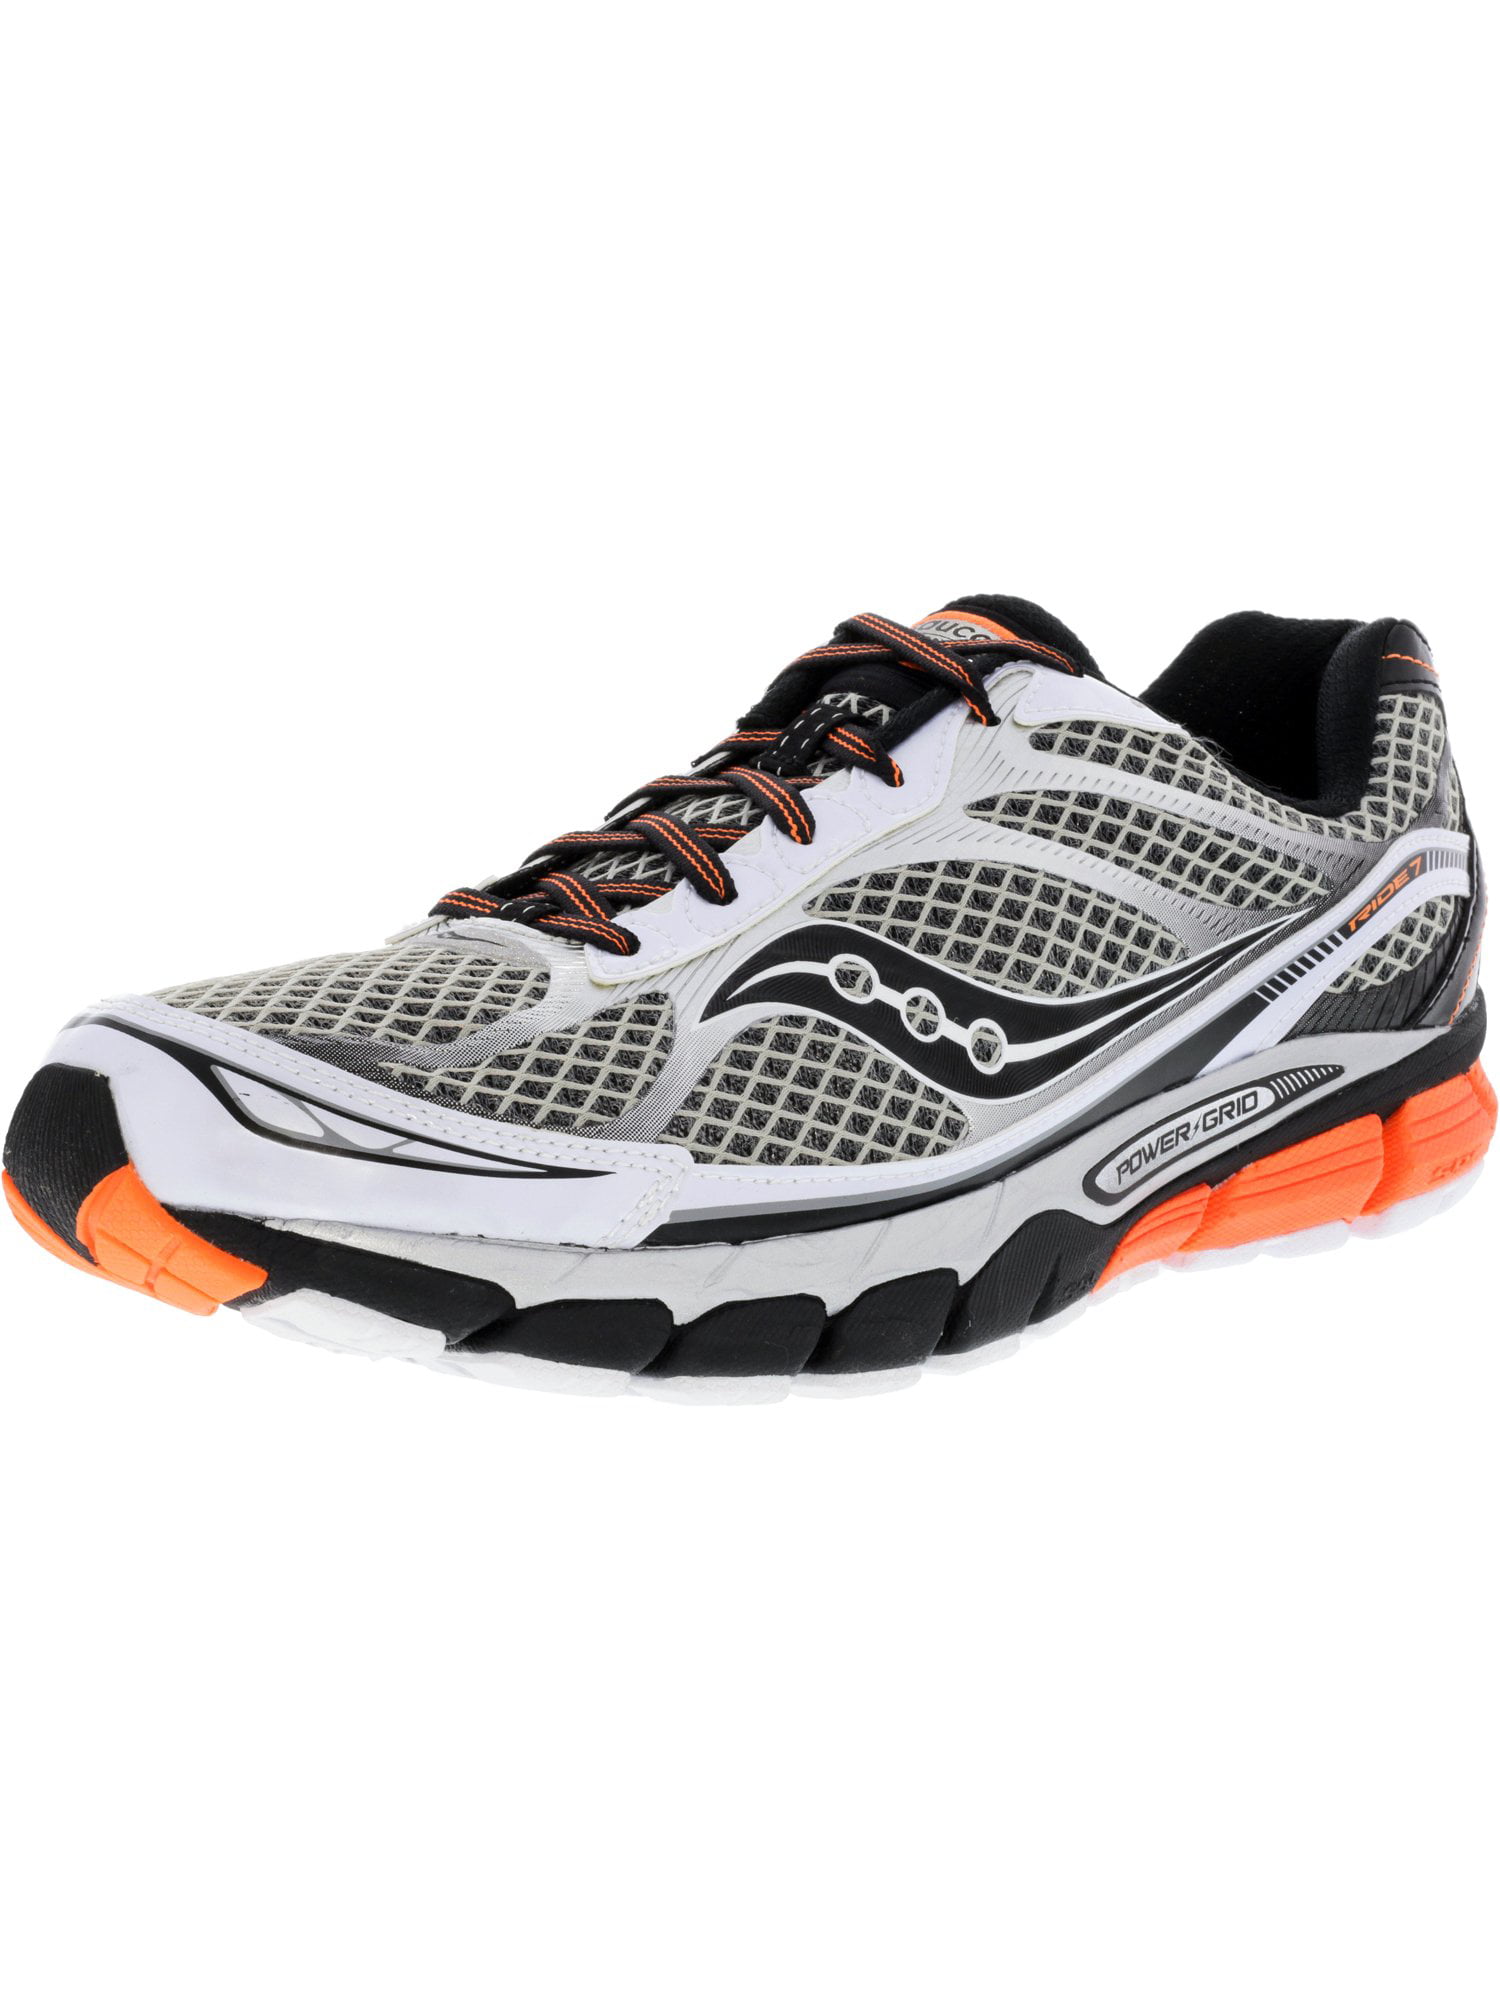 saucony ride 7 mens running shoes